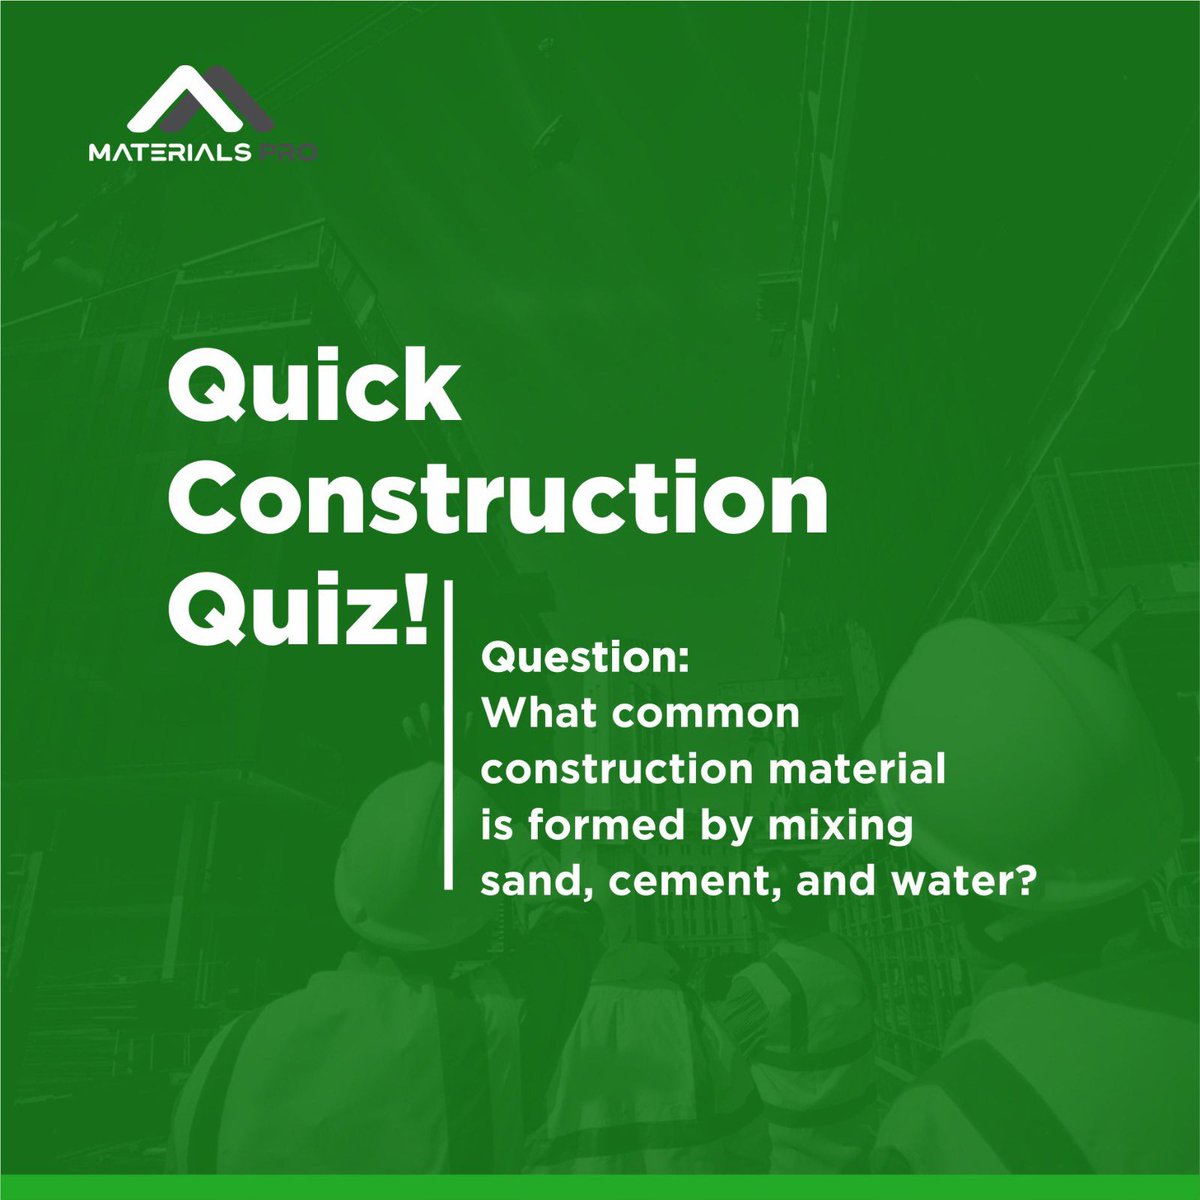 Test Your Construction Knowledge! 

What common construction material is formed by mixing sand, cement, and water?

#constructionindustry #constructiontips 
#homebuildingtips
#funfactfriday #constructionfacts #buildingmaterials #MaterialsPro
#construction #constructionmaterials